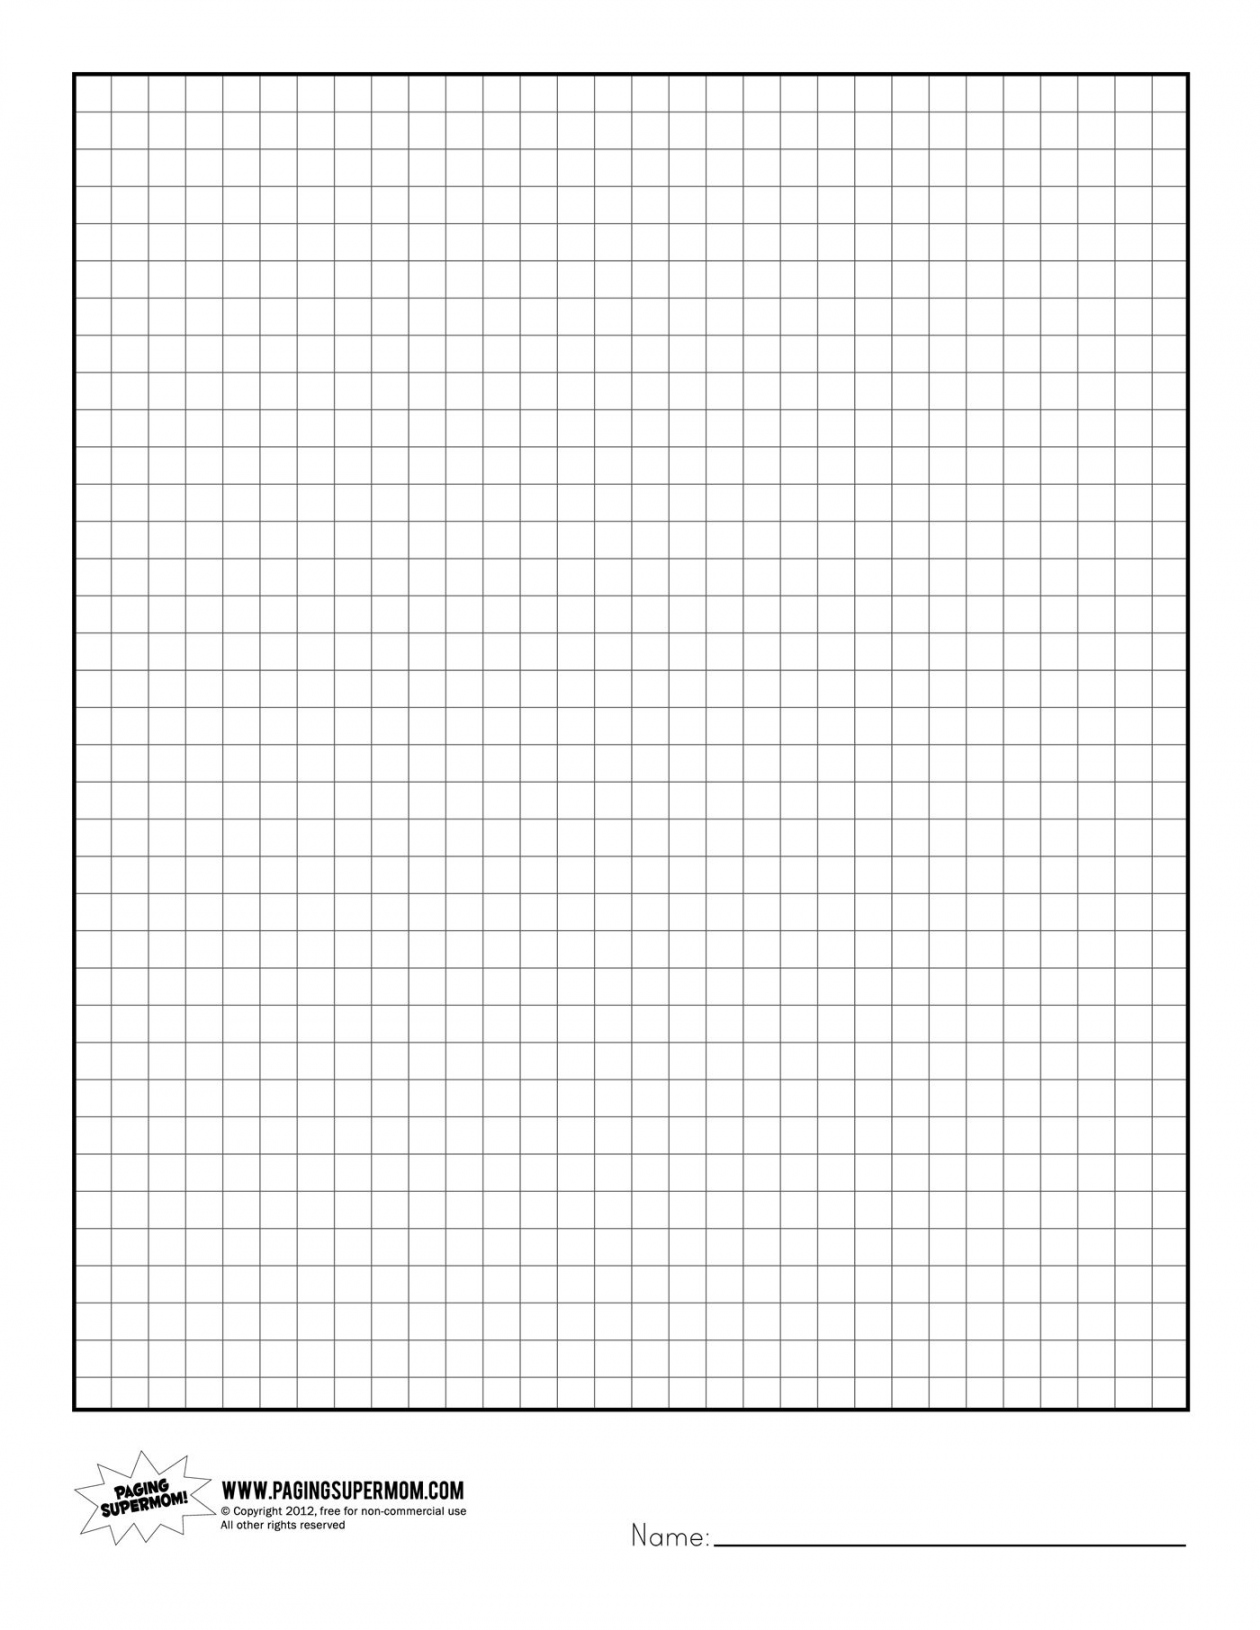 Graphing Paper Free Printable - Printable - Pin on Healthy eating